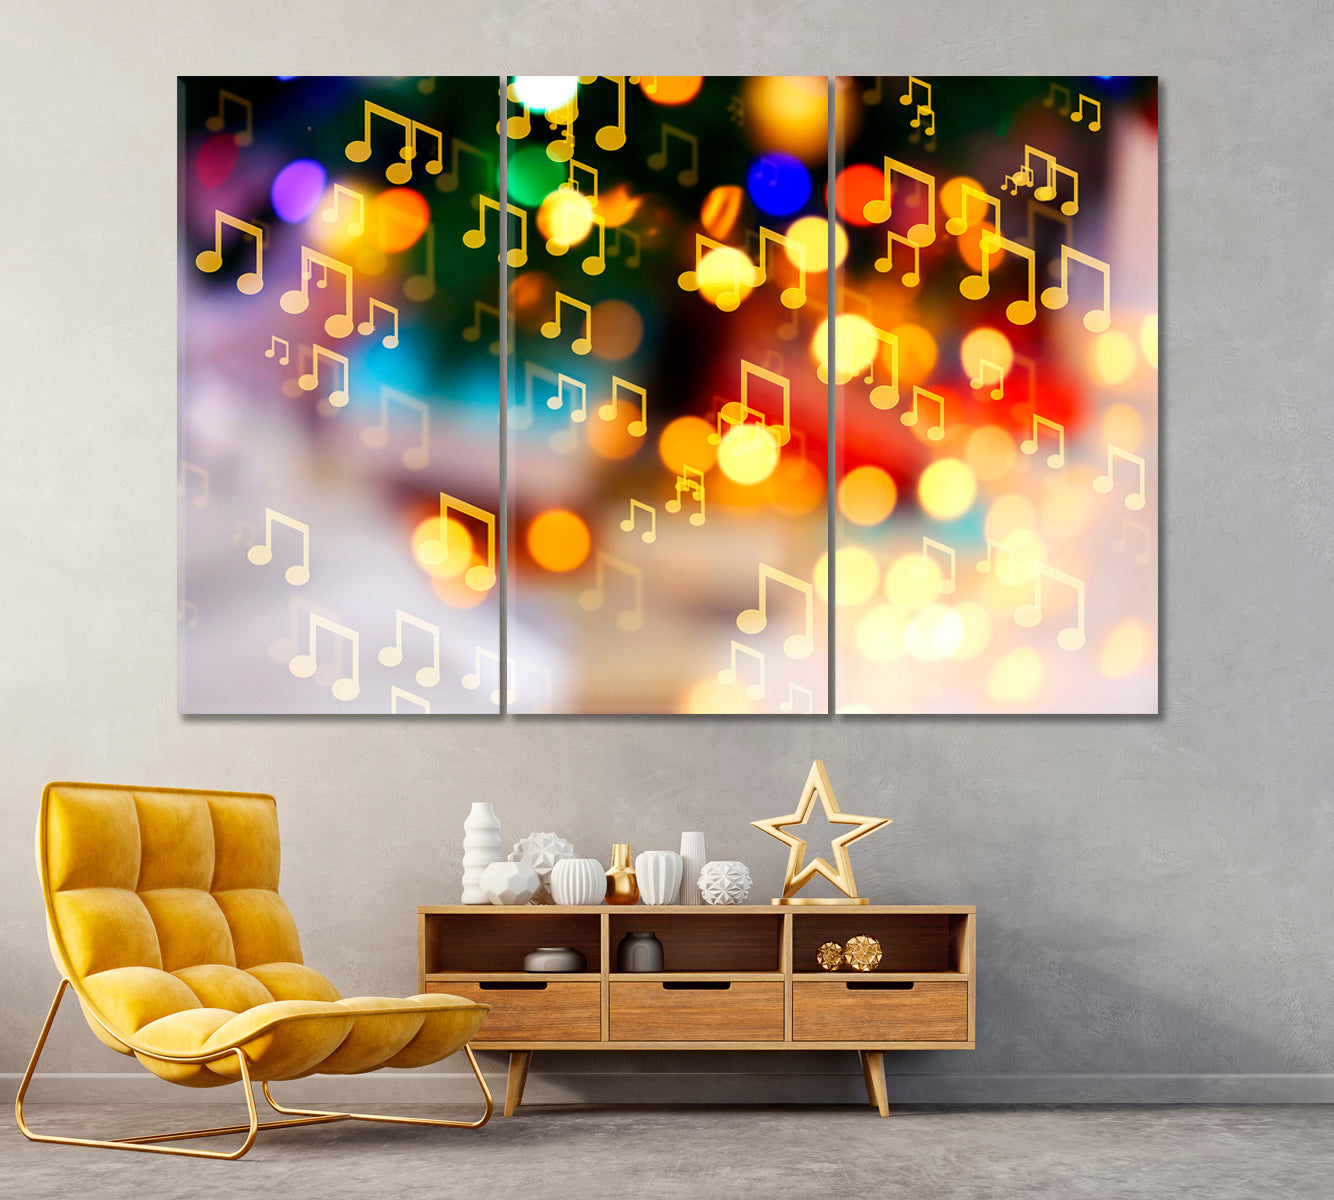 Music Notes on Blurred Lights Canvas Print ArtLexy 3 Panels 36"x24" inches 